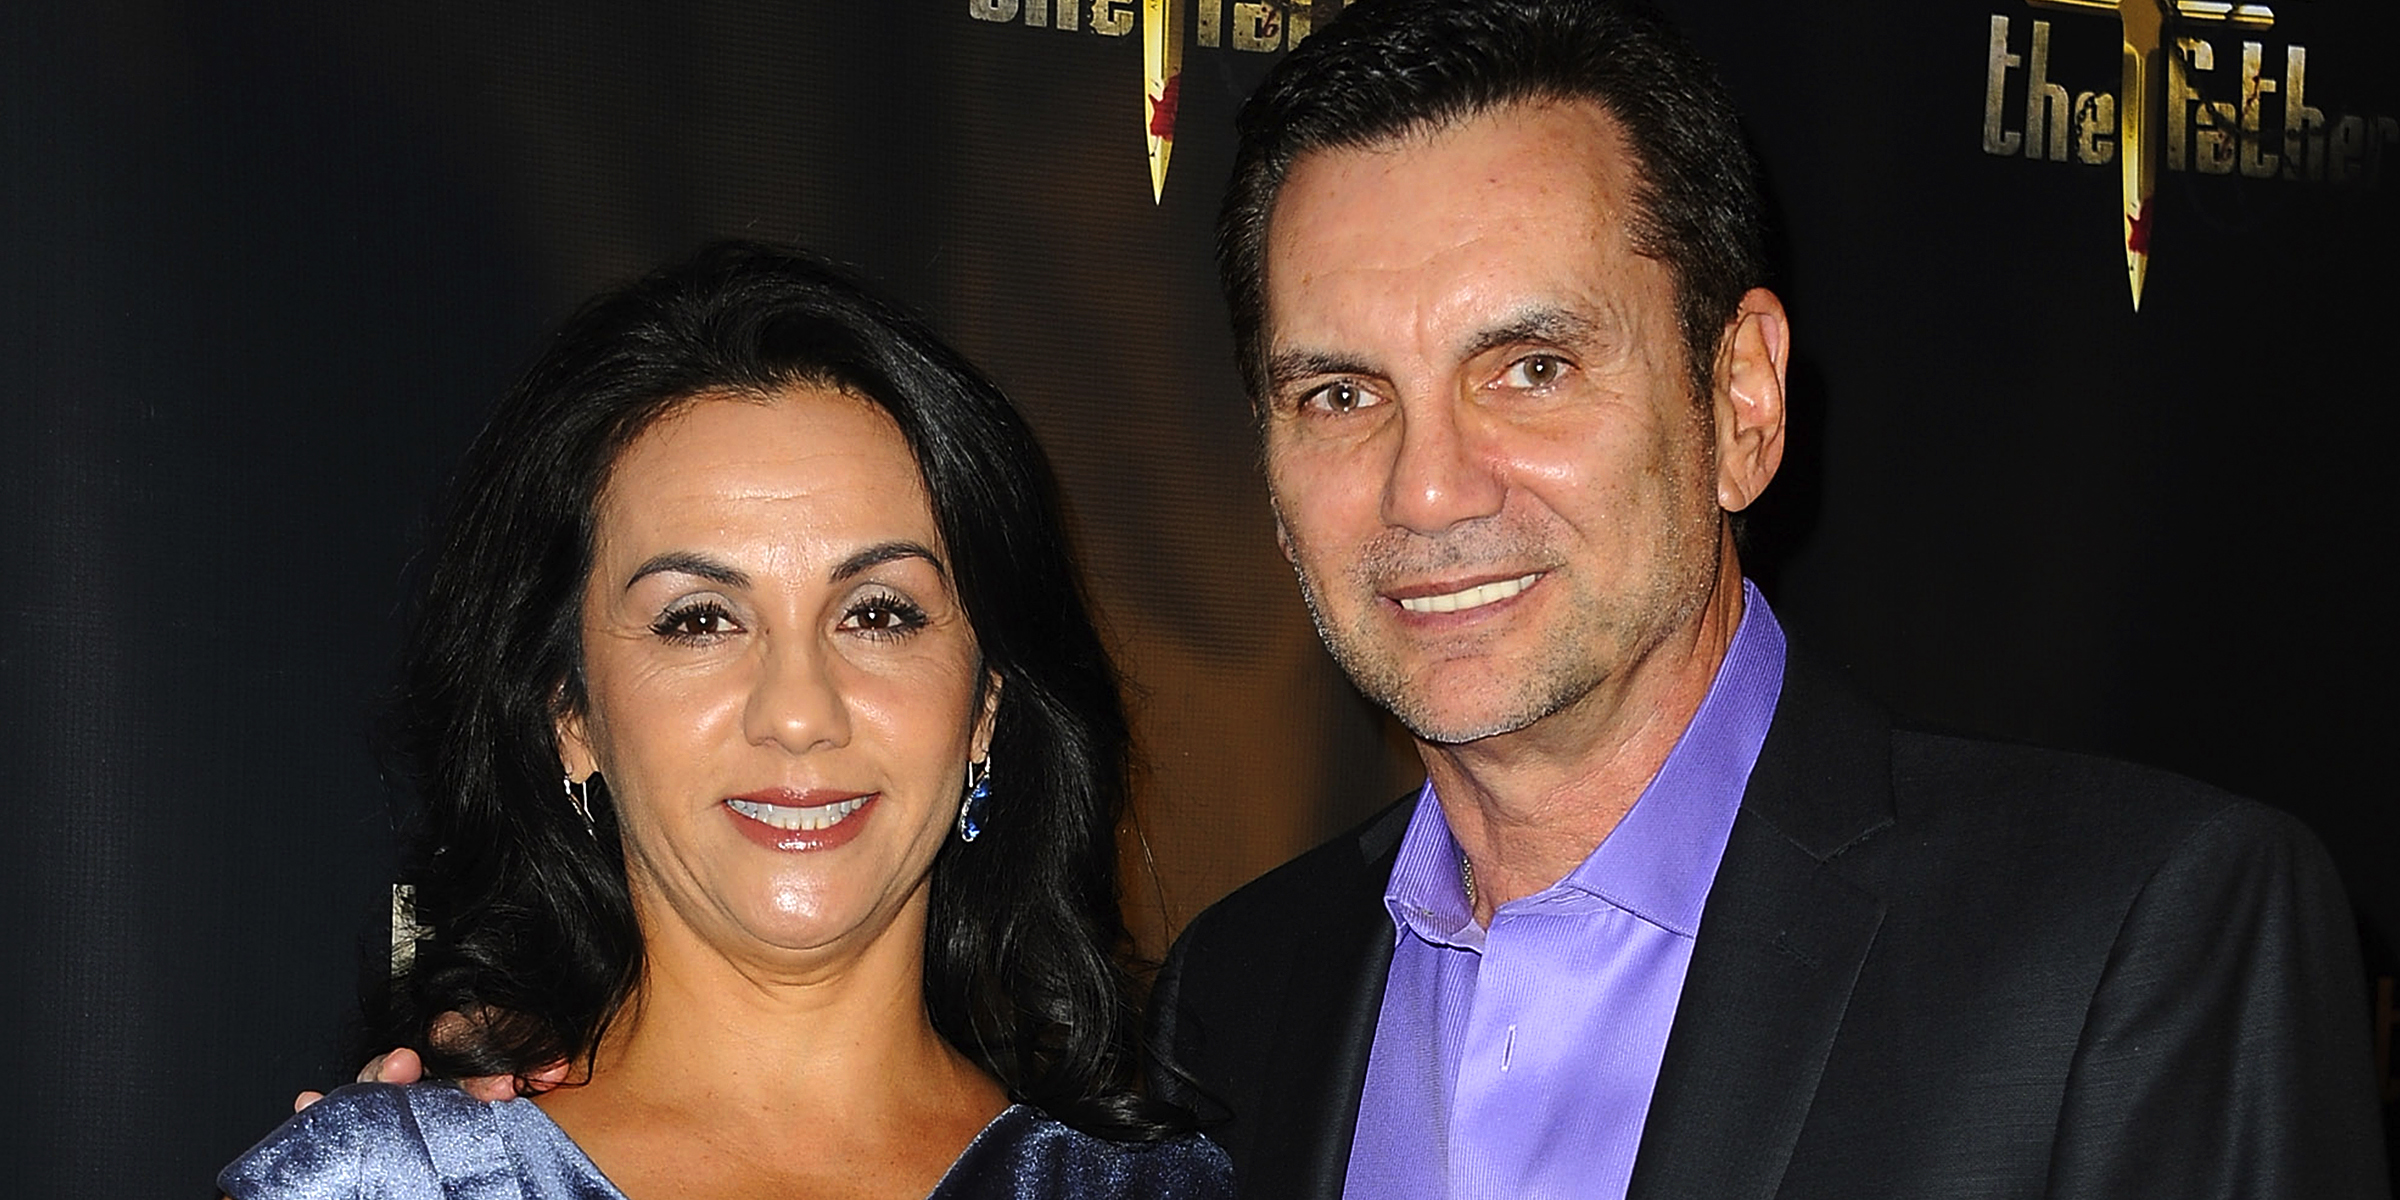 Camille Franzese and Michael Franzese | Source: Getty Images